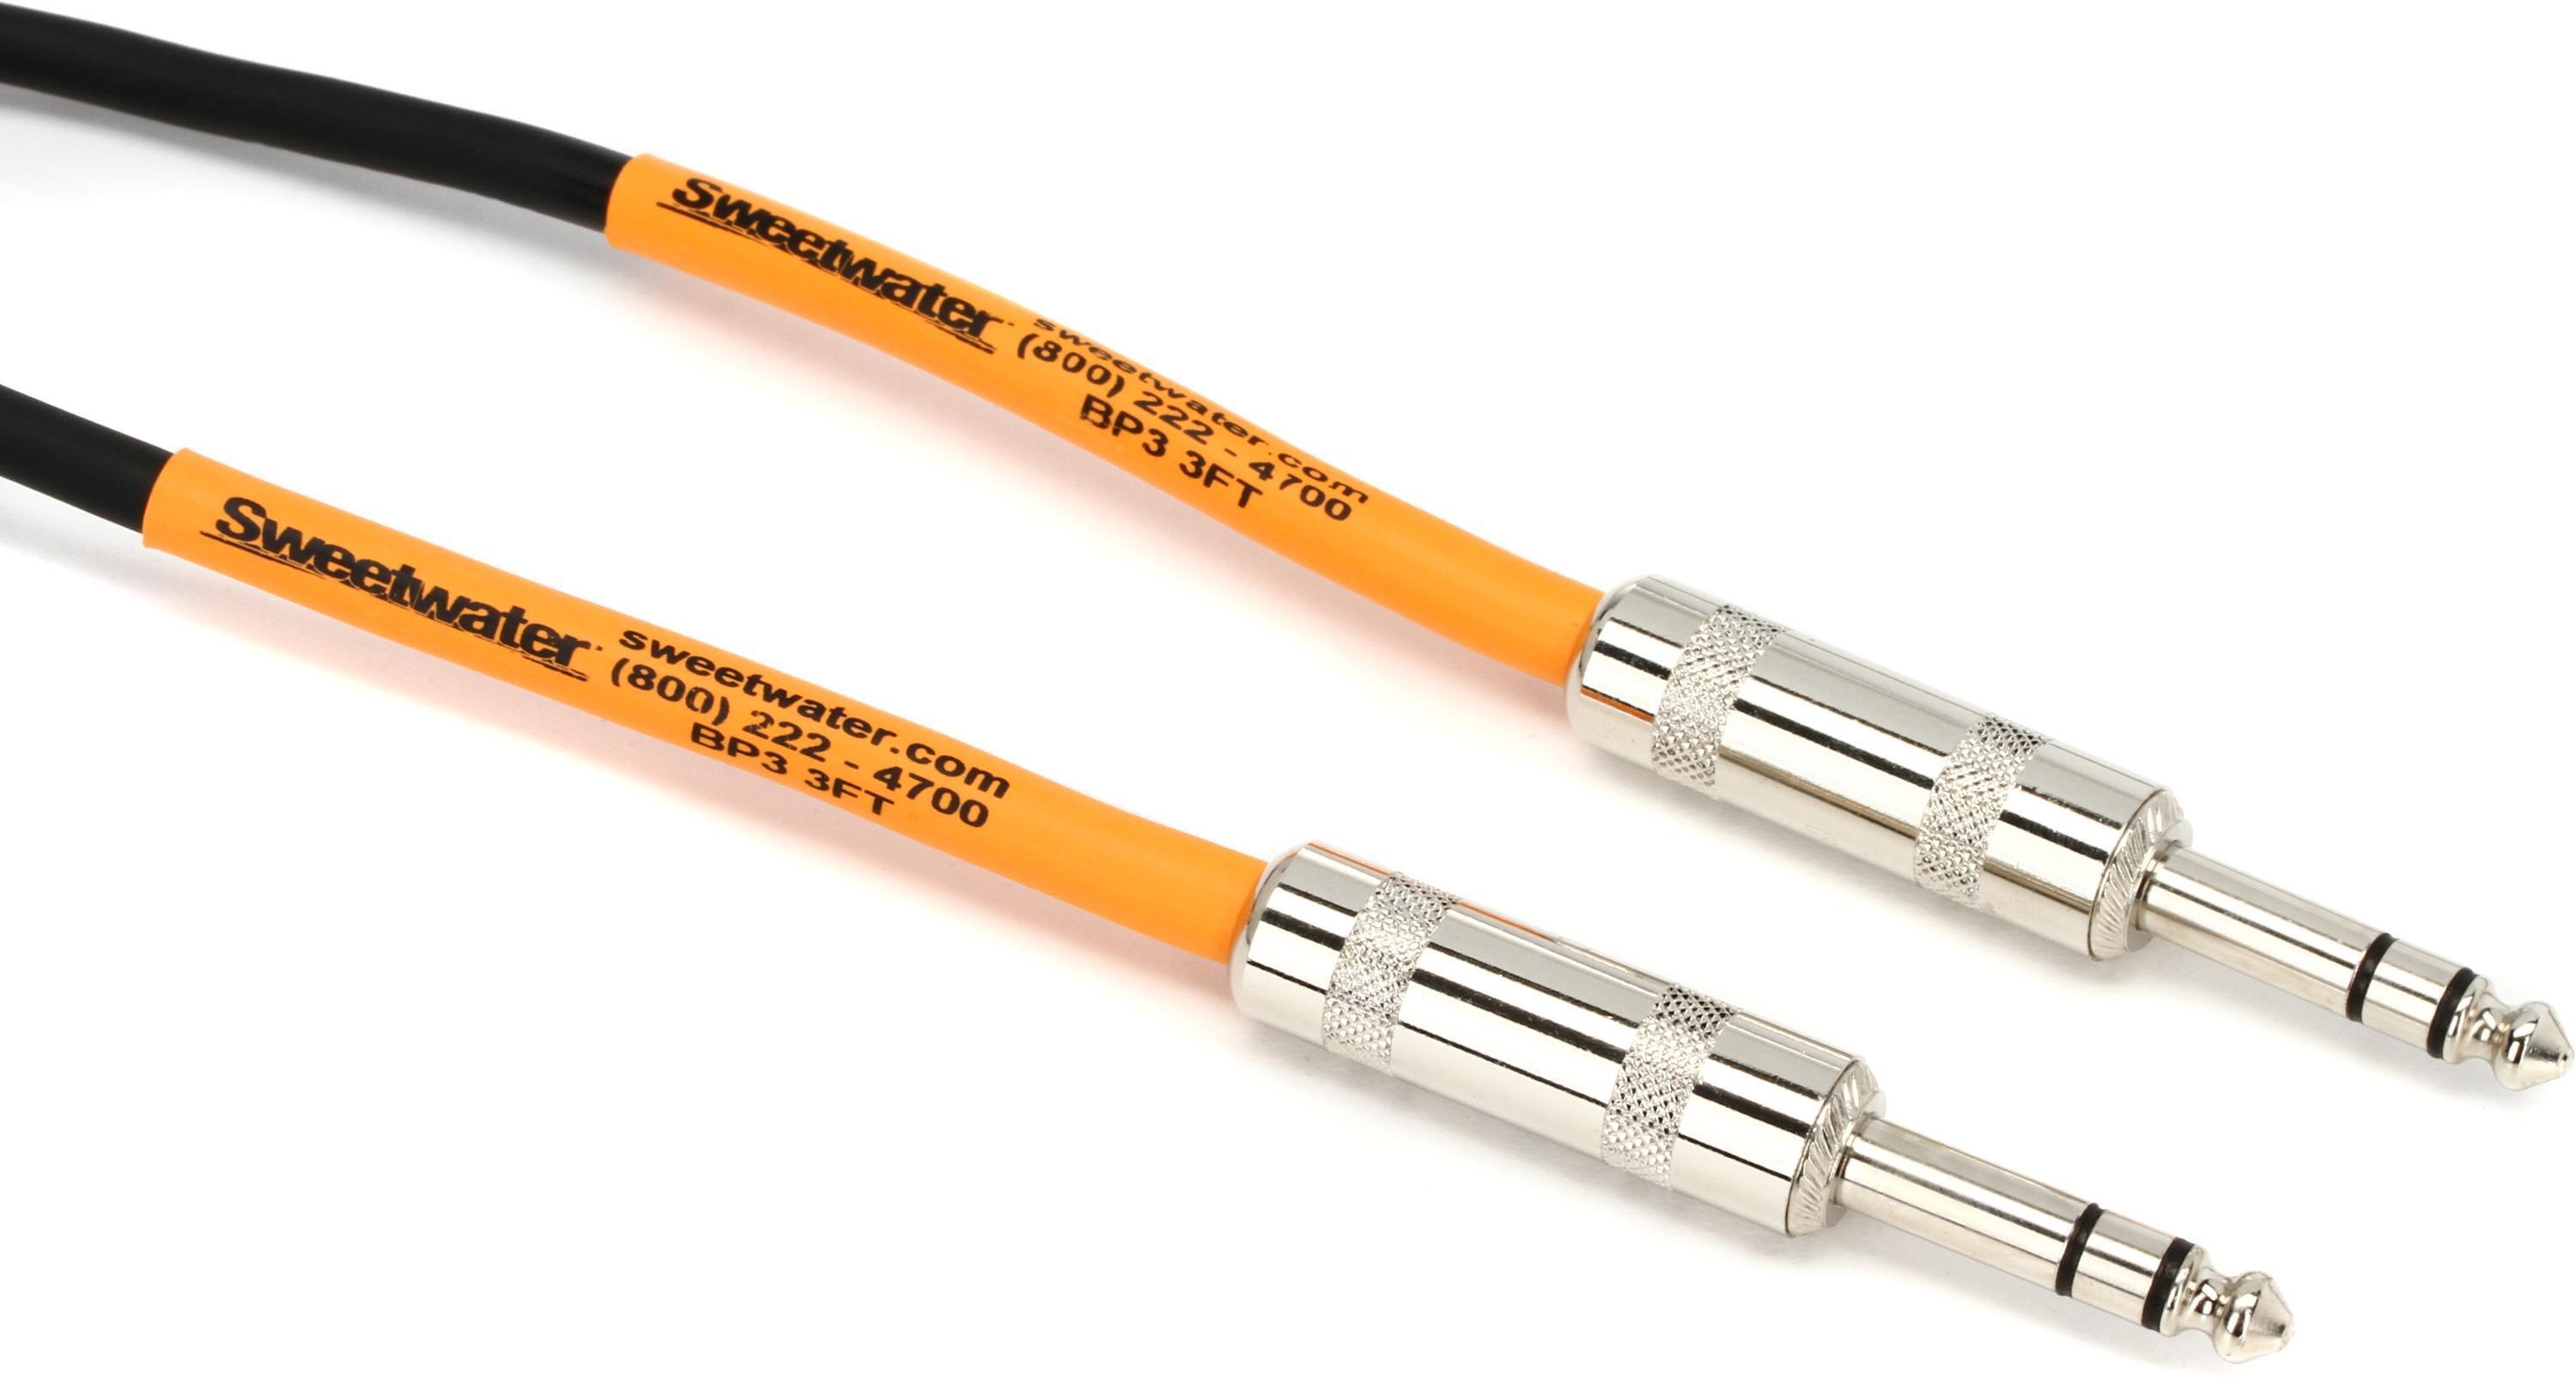 Bundled Item: Pro Co BP-3 Excellines Balanced Patch Cable - 1/4-inch TRS Male to 1/4-inch TRS Male - 3 foot